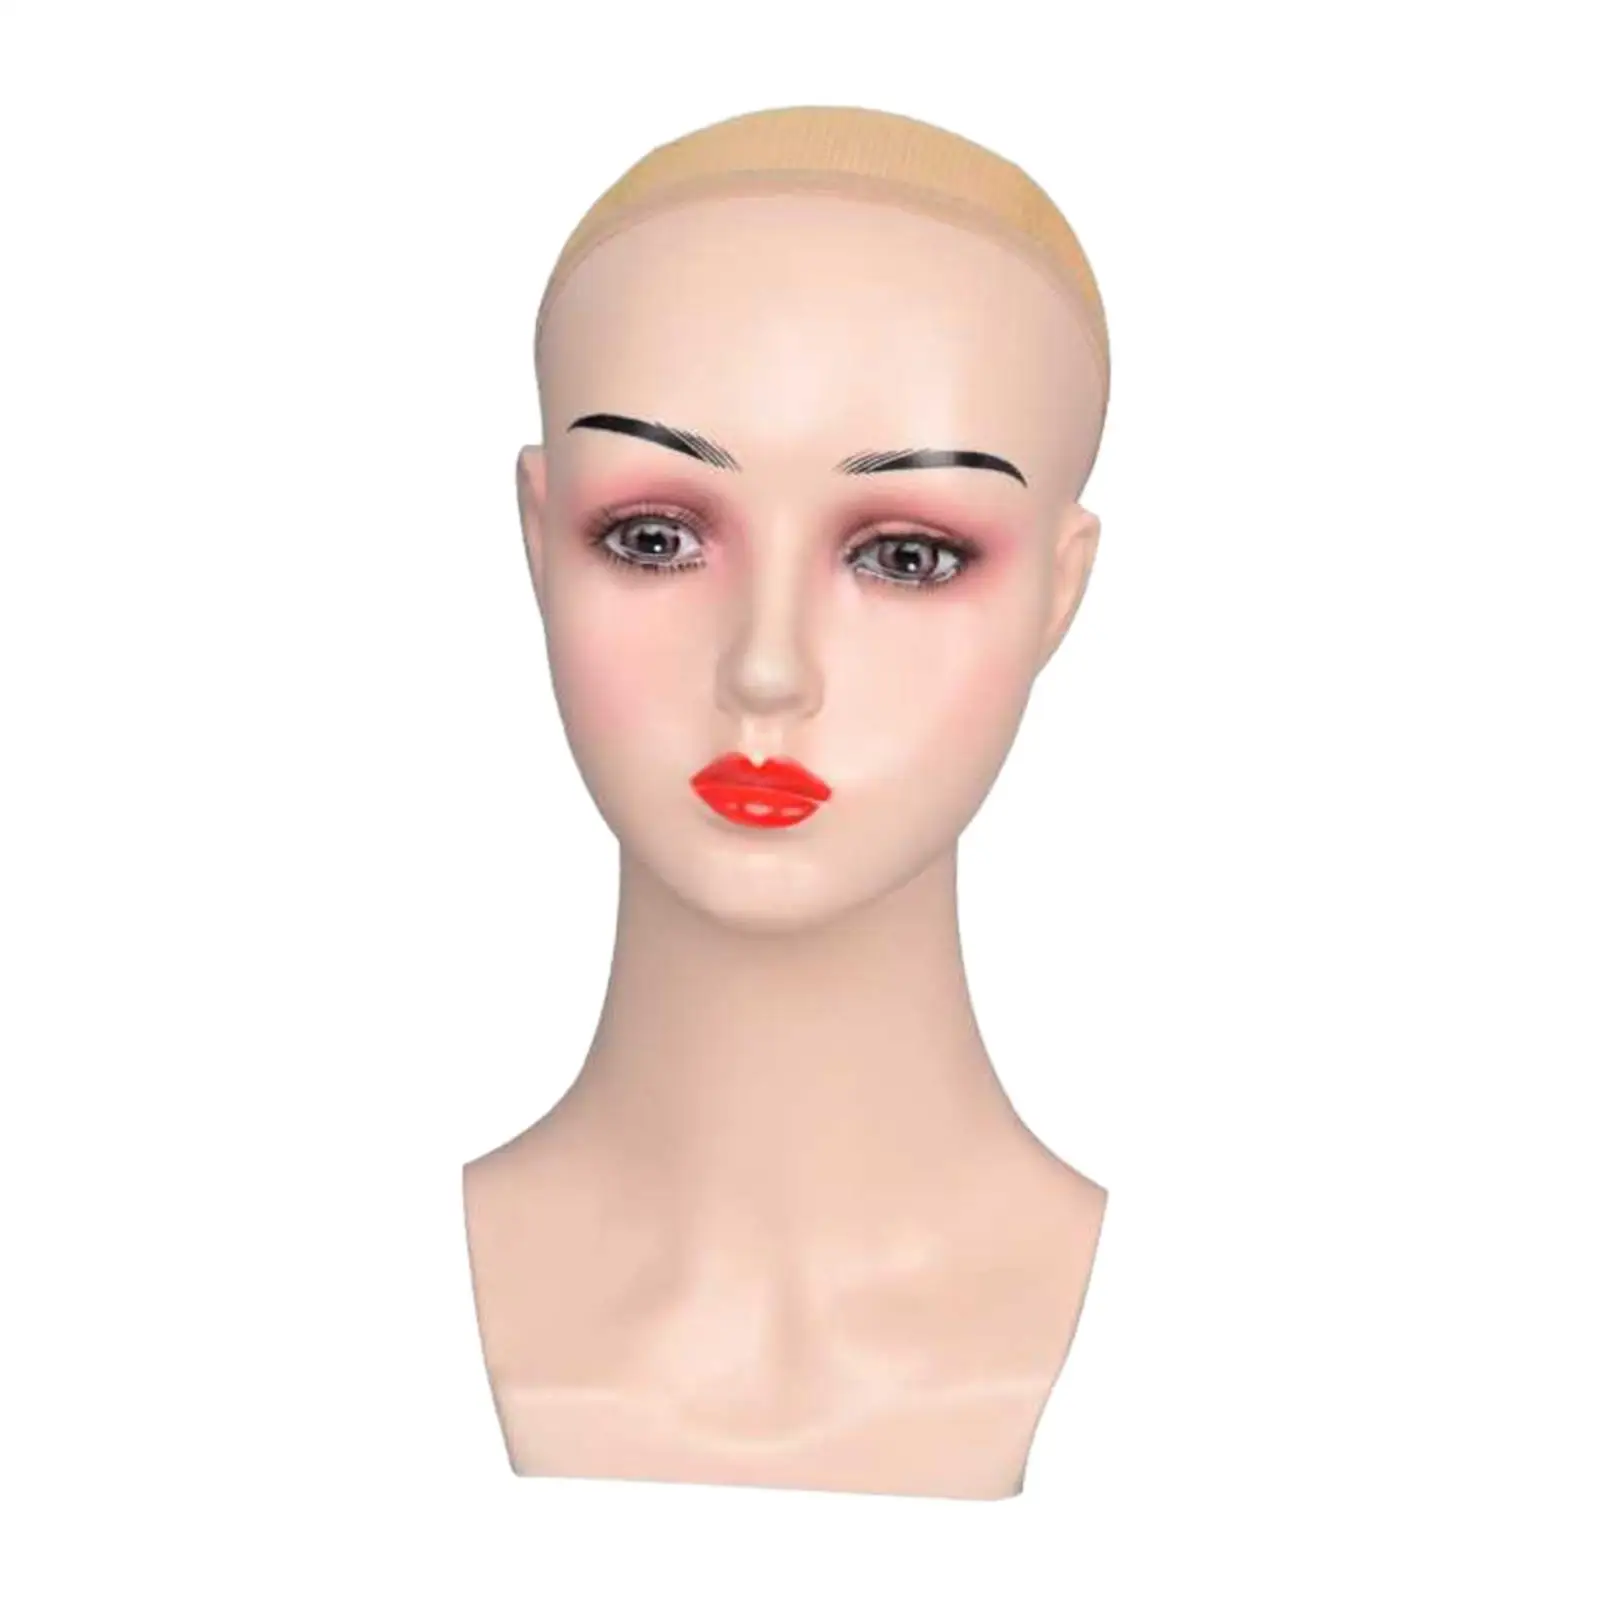 Female Bald Mannequin Head Hat Display Rack Multipurpose Wig Display Model for Necklace Jewelry Hairpieces Wigs Making Hats